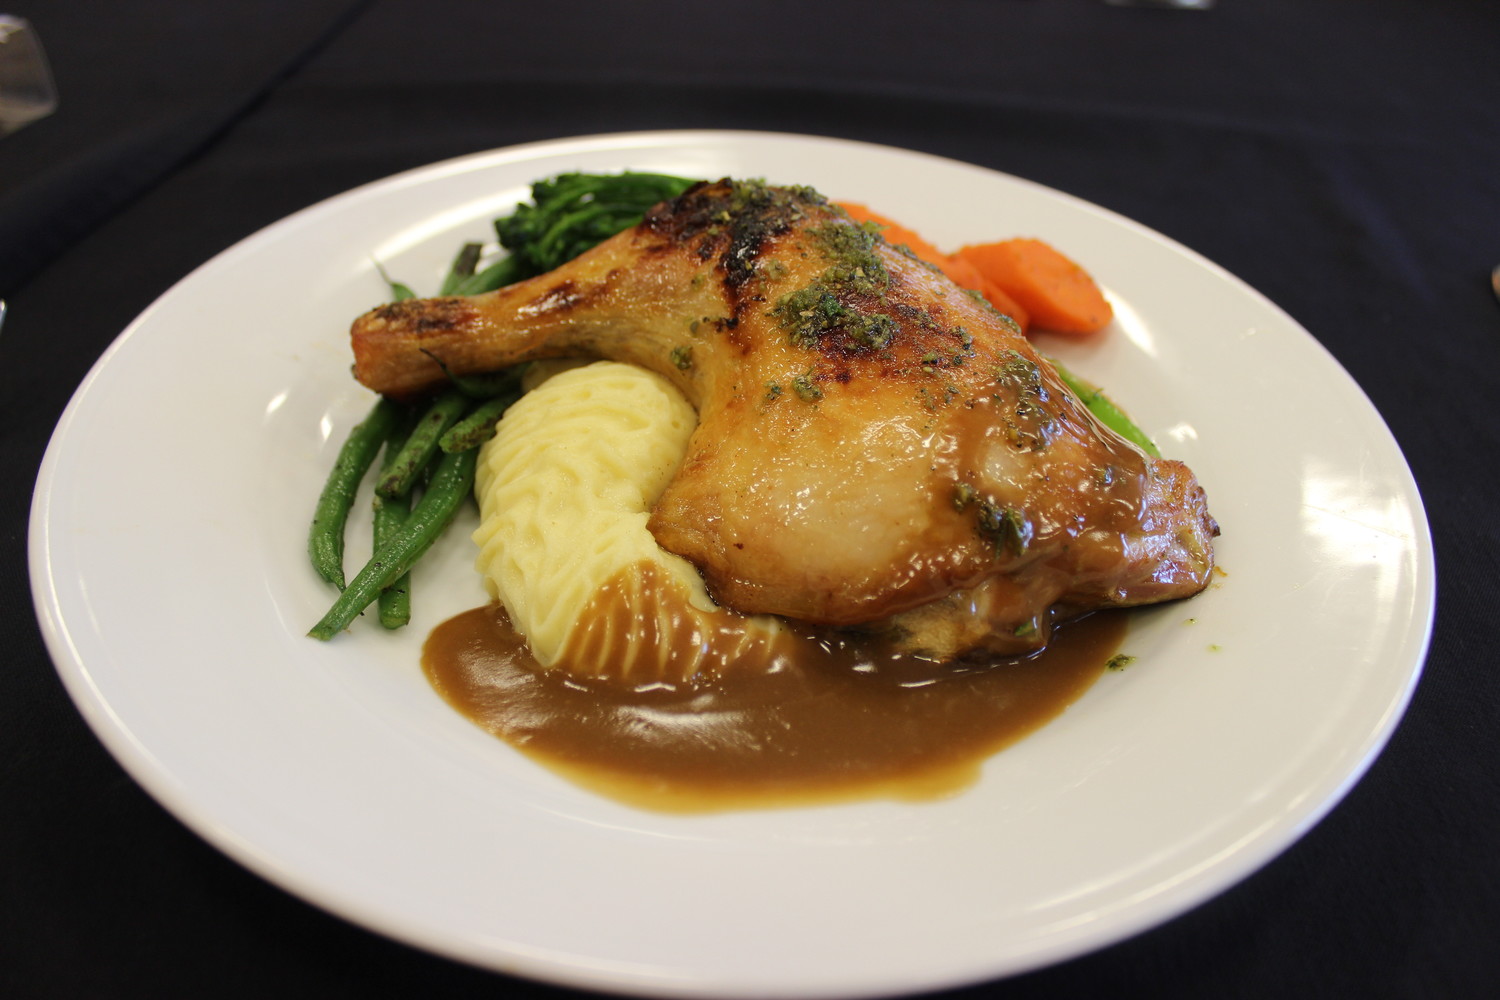 Roasted herb chicken with butter-whipped potatoes and sautéed root vegetables in a veal Brandywine demi glaze, which is an example of the cuisine Sawgrass Events can provide its customers.